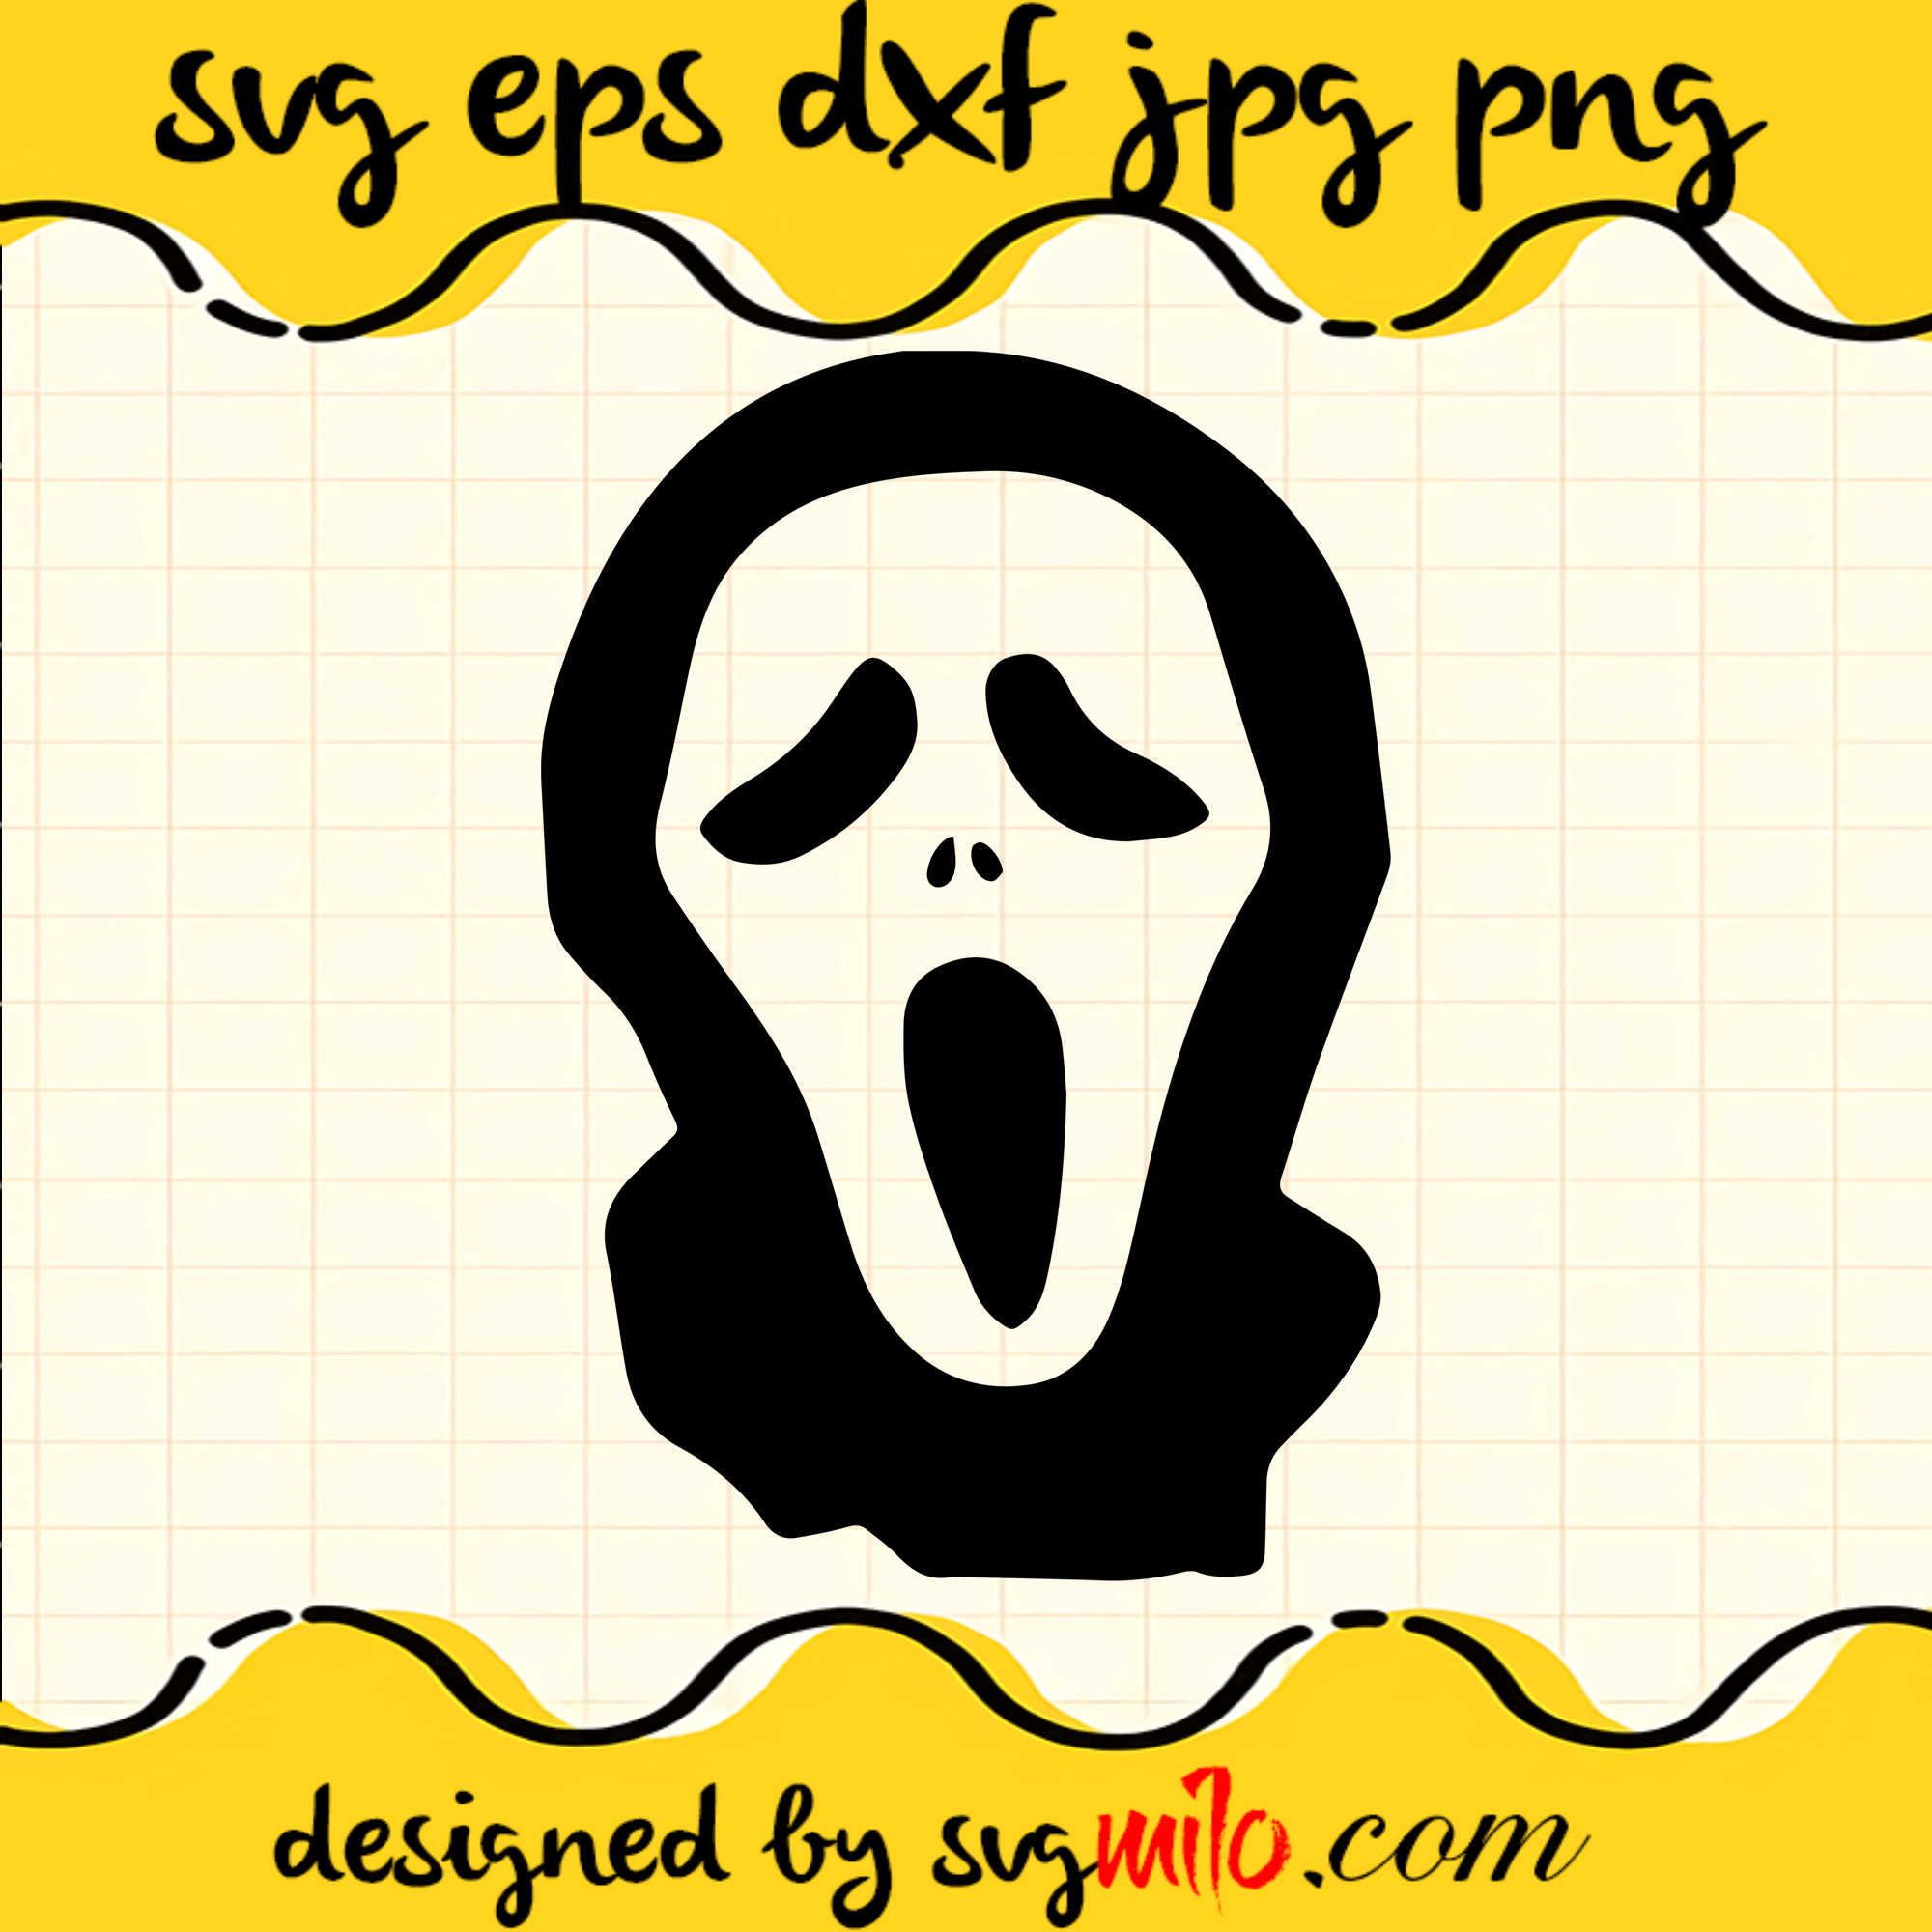 Ghost Face SVG, Halloween SVG, EPS, PNG, DXF, Premium Quality - SVGMILO